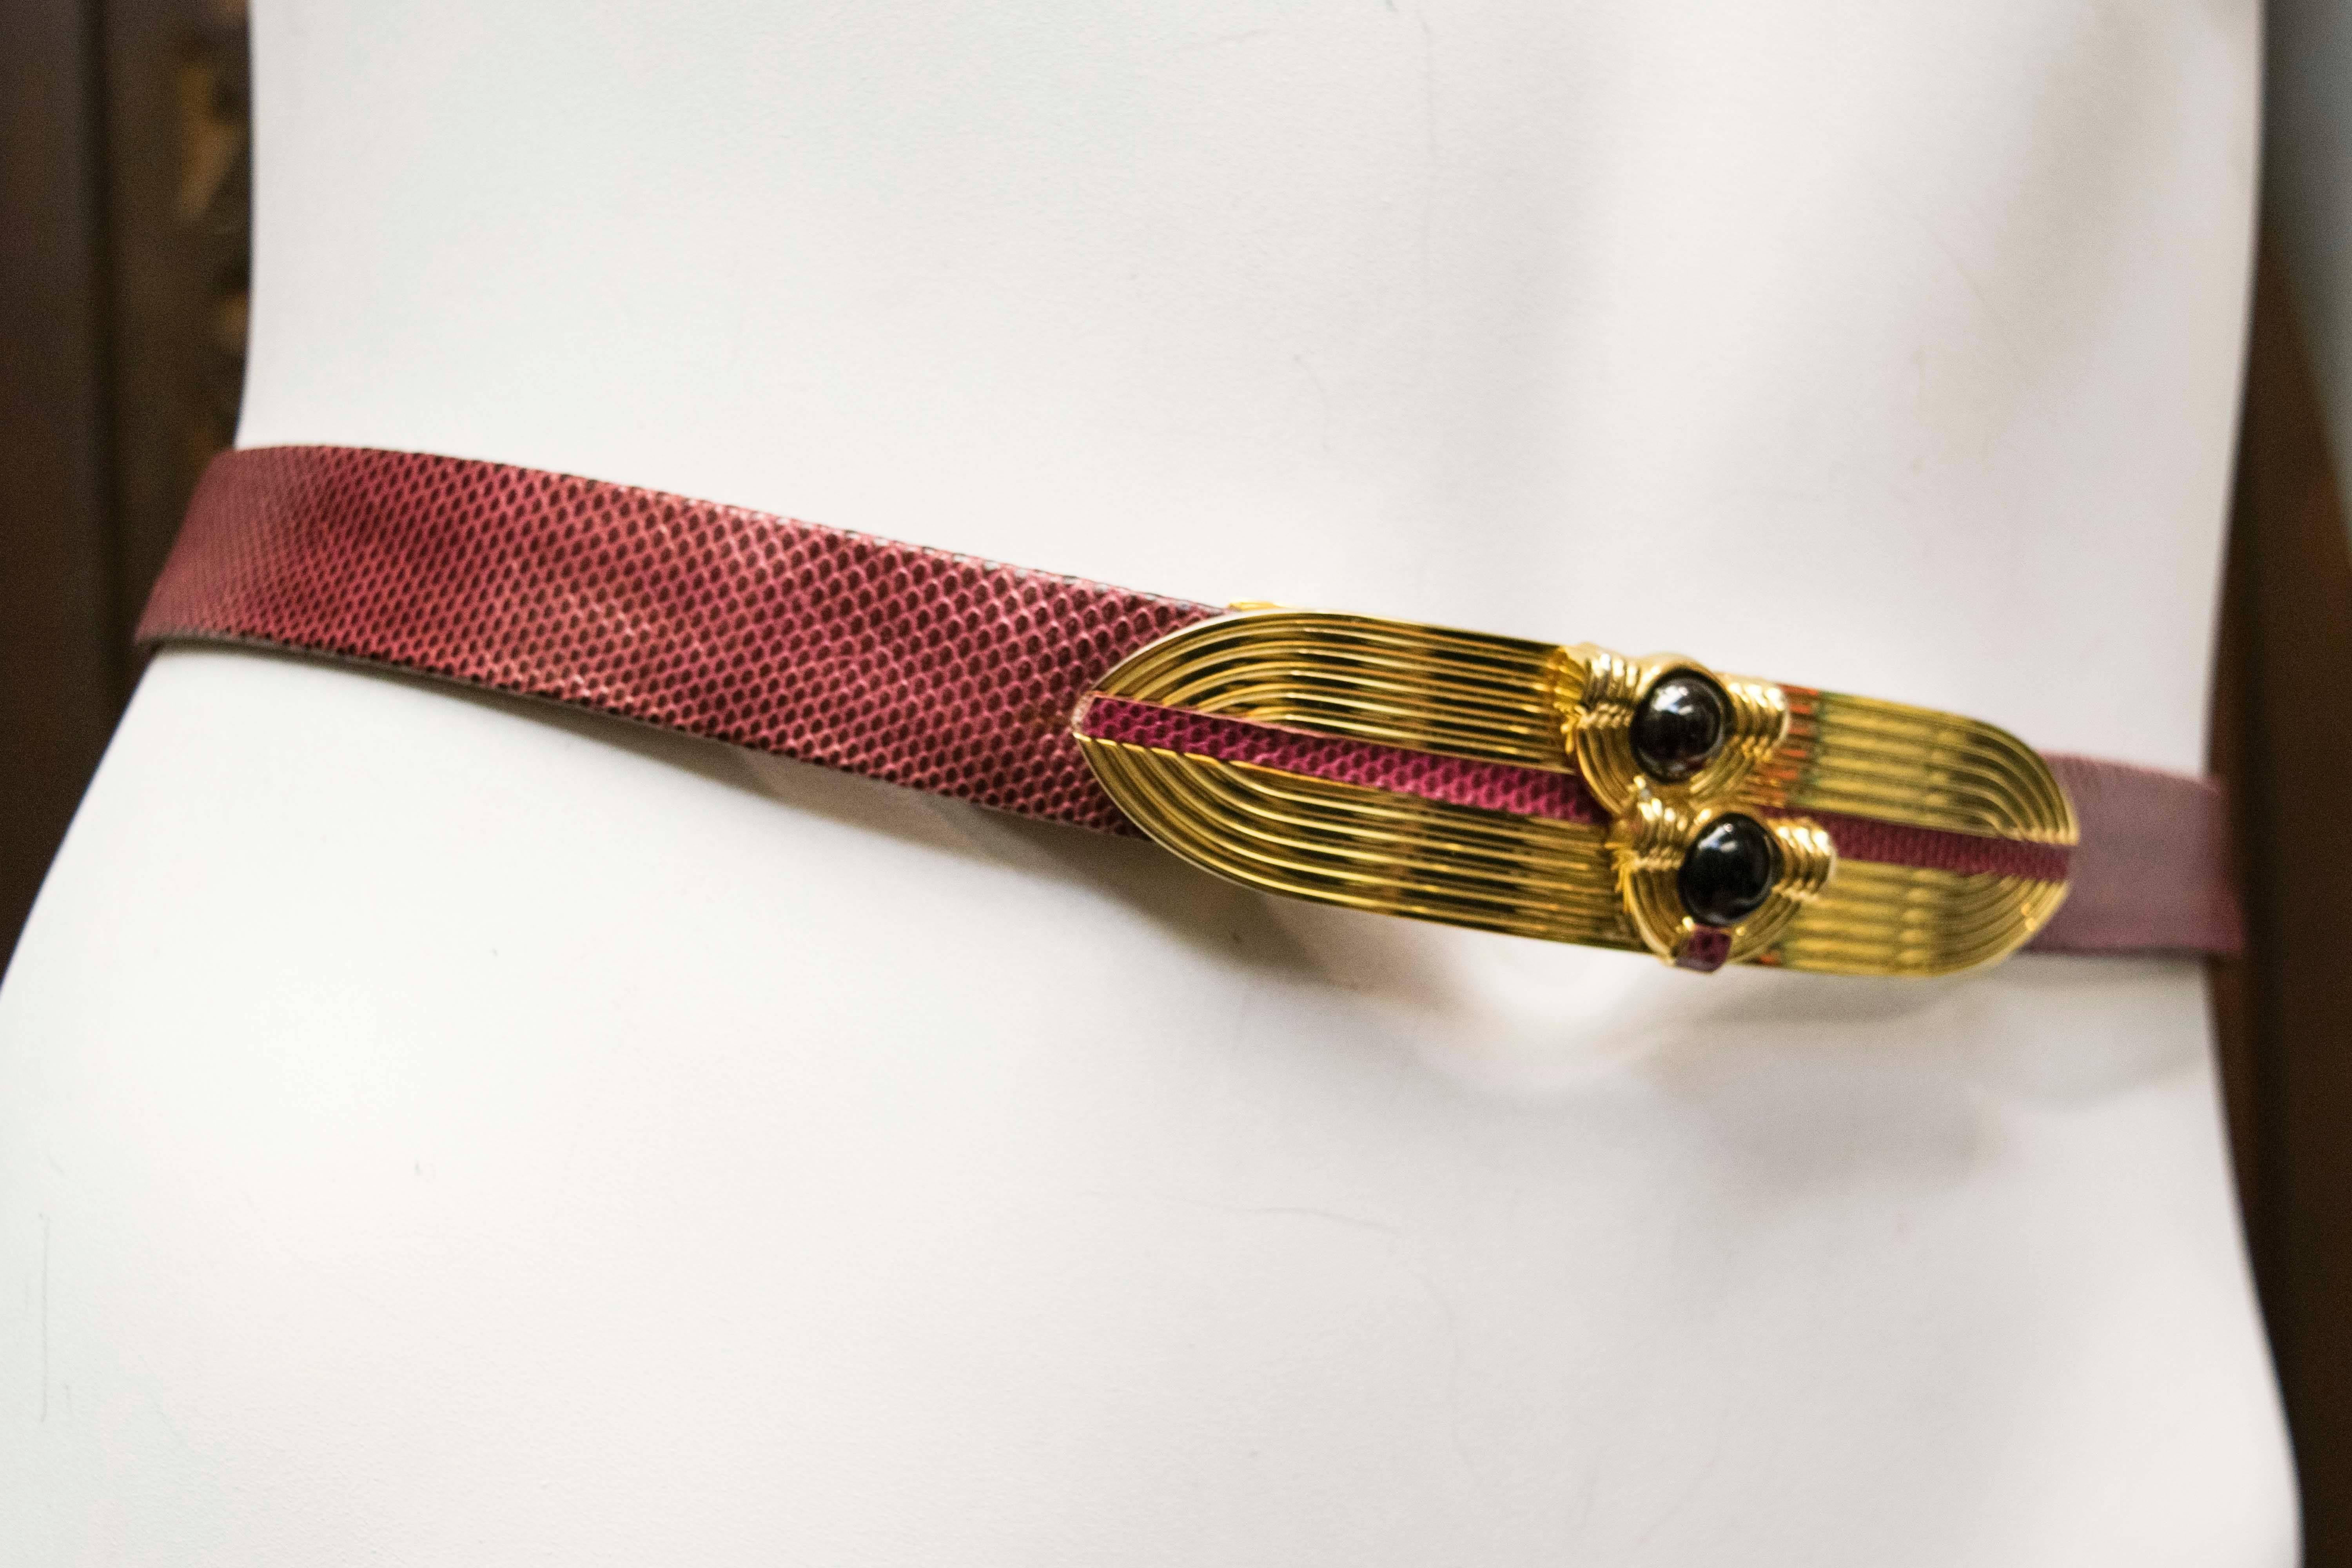 1980's Judith Leiber fully-adjustable belt made in maroon lizard skin, with modernist gold tone belt buckle with two set-in glass beads, one black and one dark maroon. Hook and eyelet closure. 

Measurements:
Waist: 23